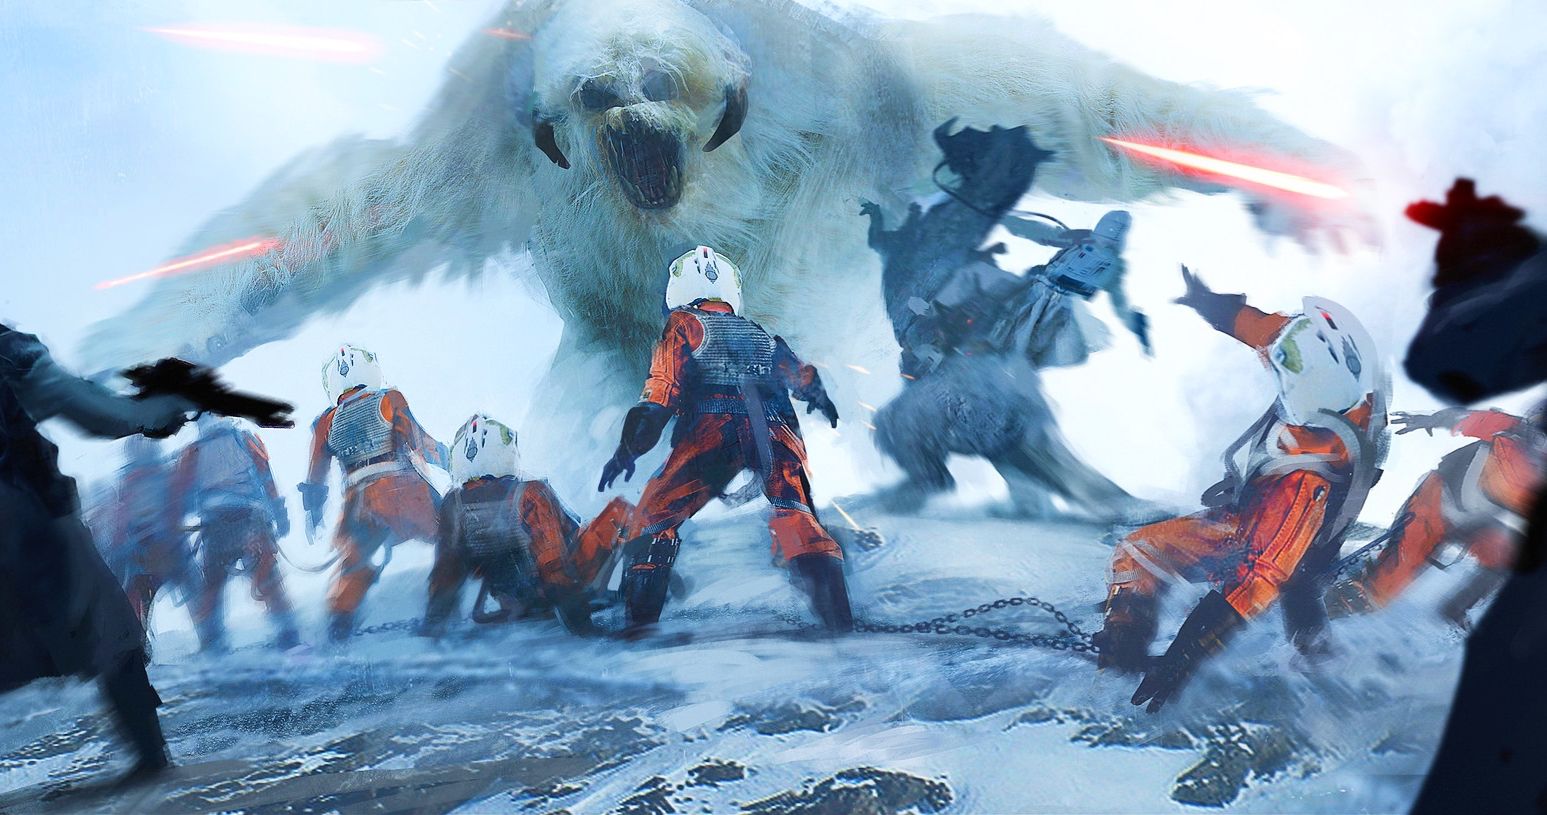 An R-Rated Star Wars Hoth Horror Movie? Doctor Strange Director Wants to Make One